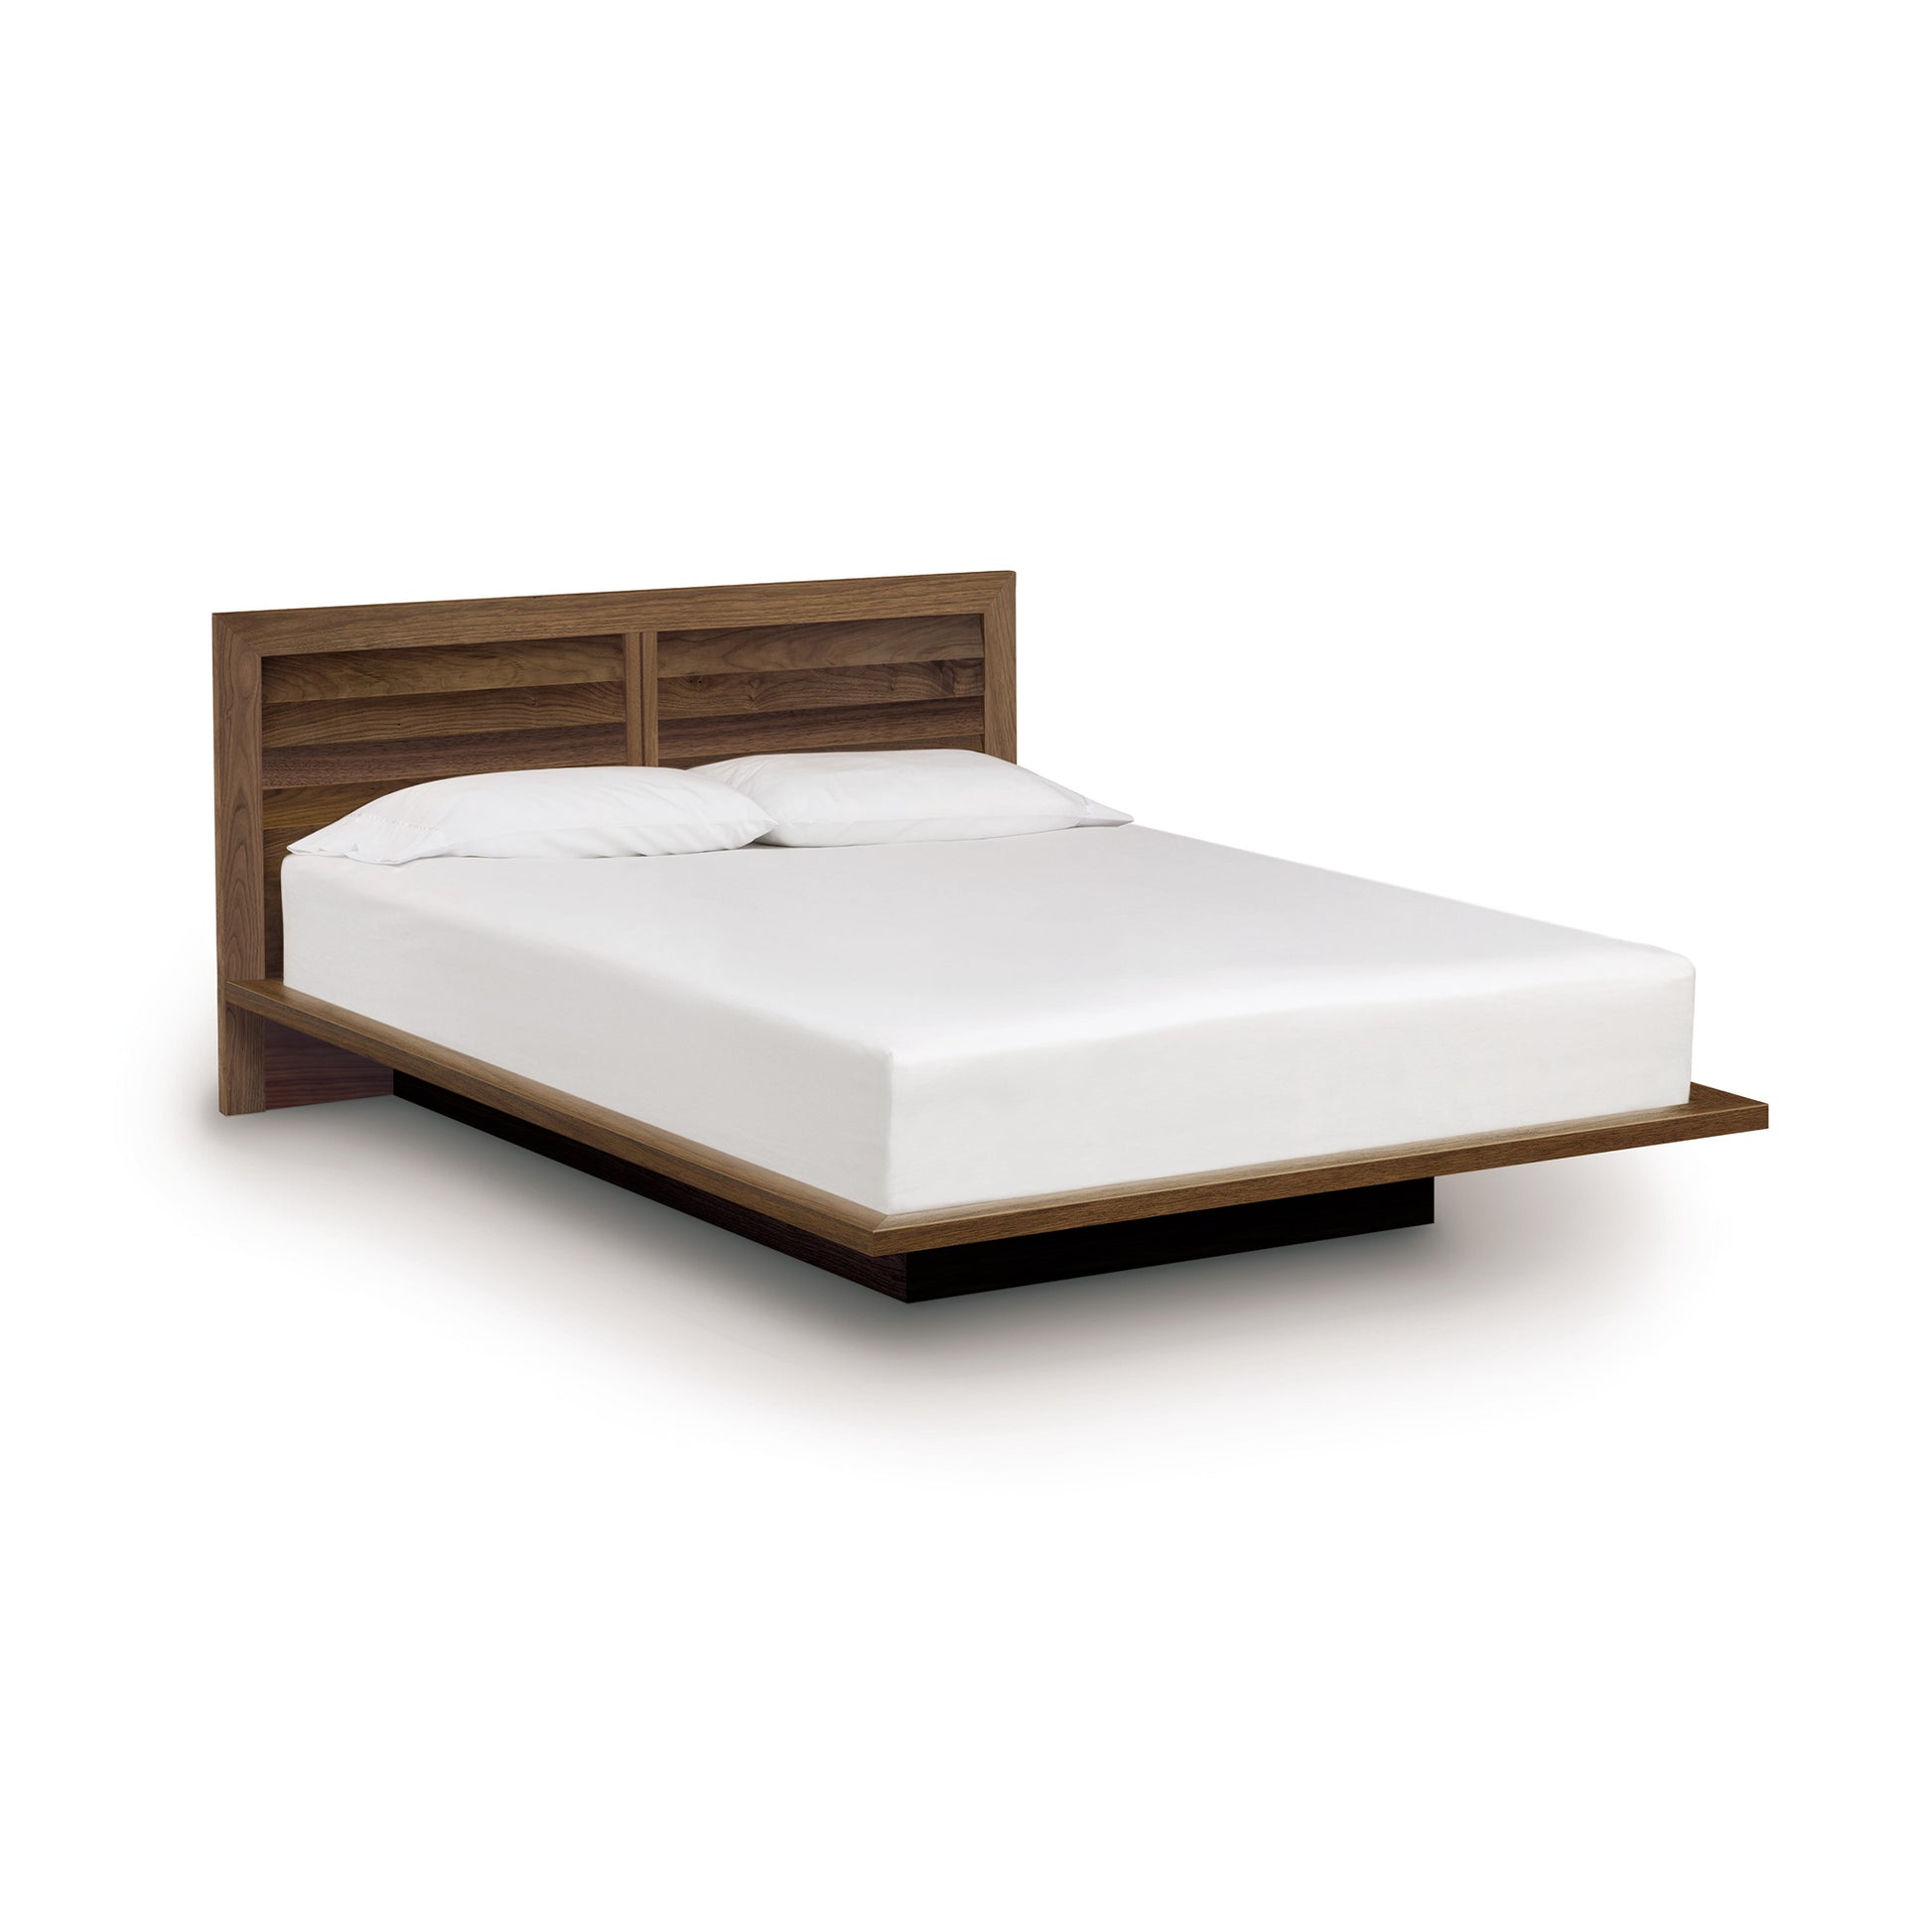 A modern eco-friendly Moduluxe Platform Bed with Clapboard Headboard - 35" Series from Copeland Furniture, isolated on a white background.